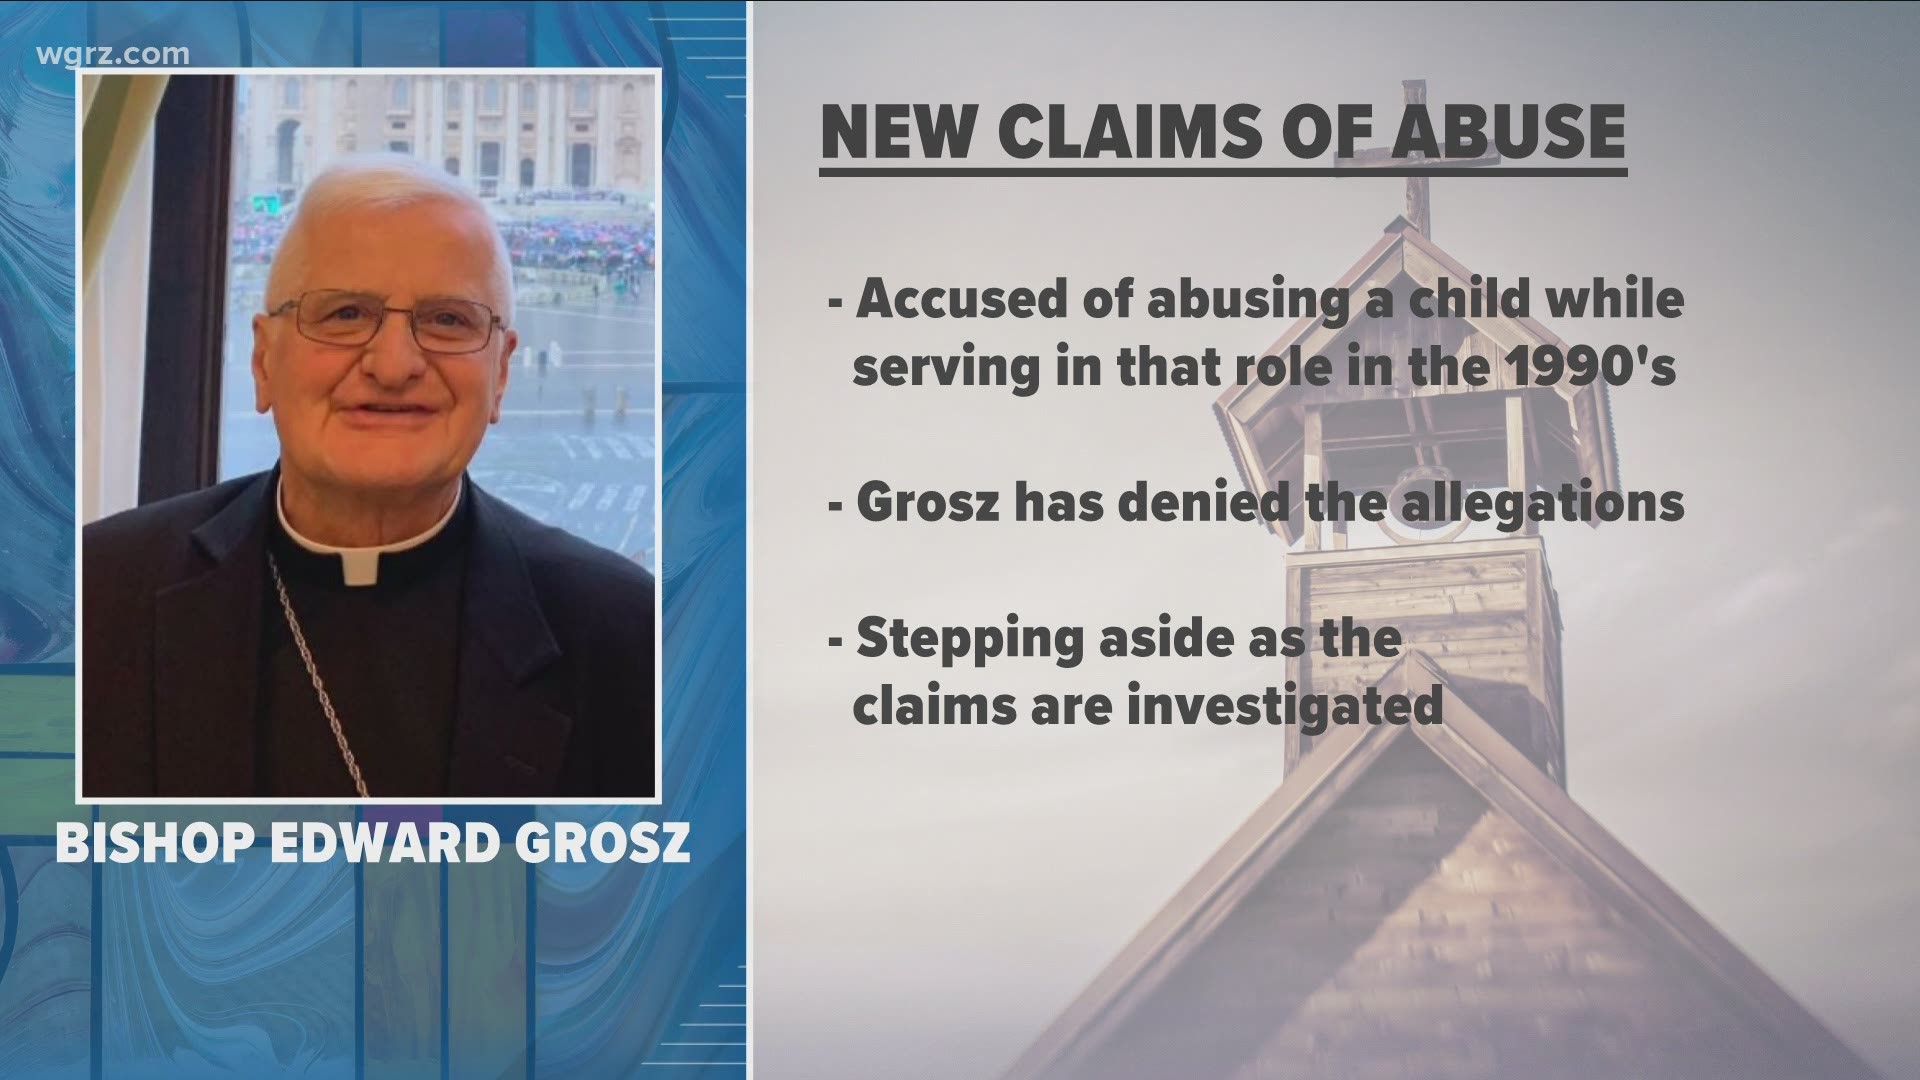 Former auxiliary bishop Edward Grosz is now accused of abusing a child while serving in that role in the 1990's.